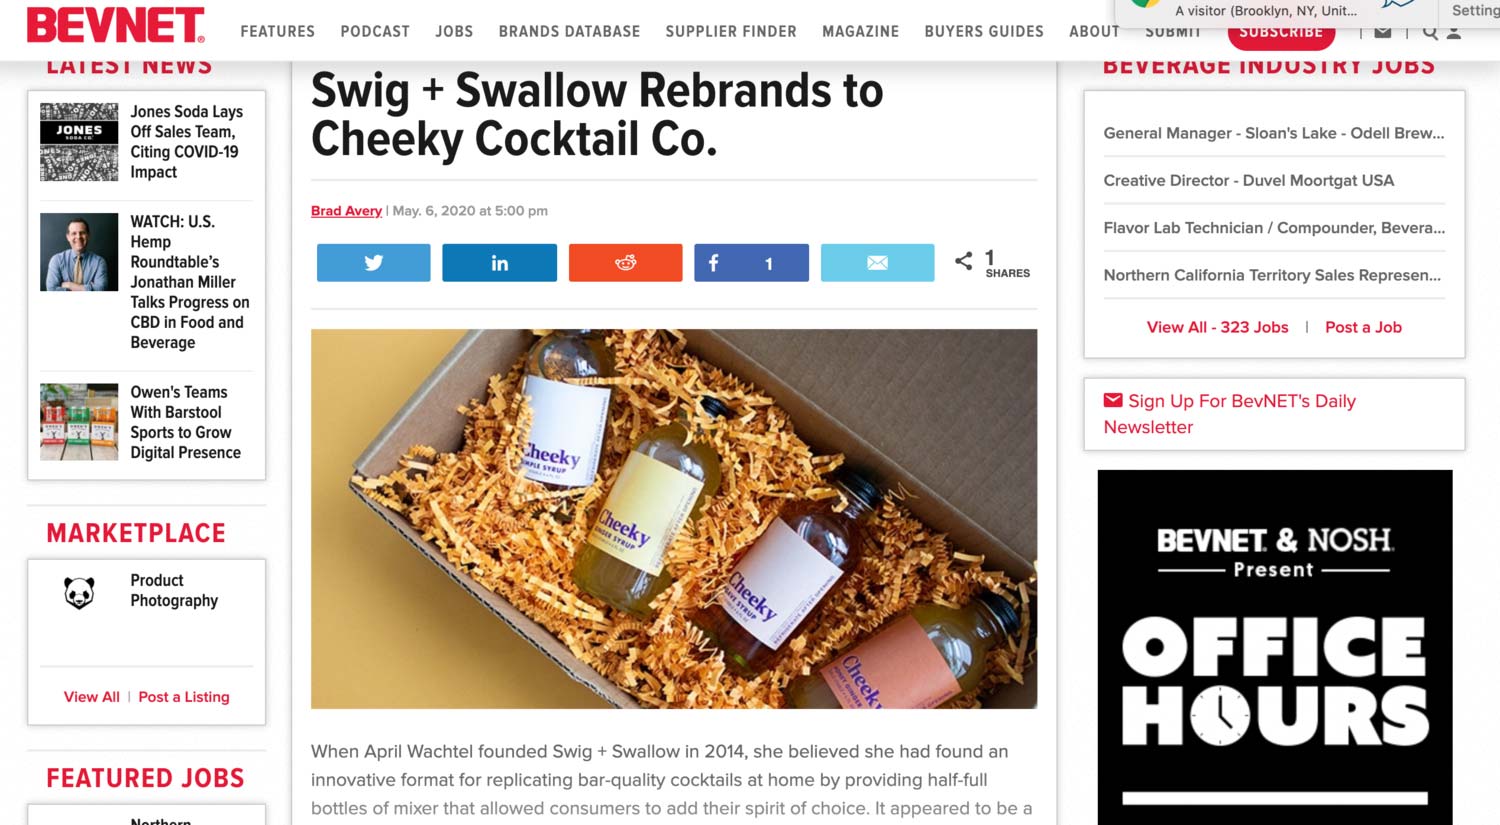 Swig + Swallow Rebrands to Cheeky Cocktail Co.